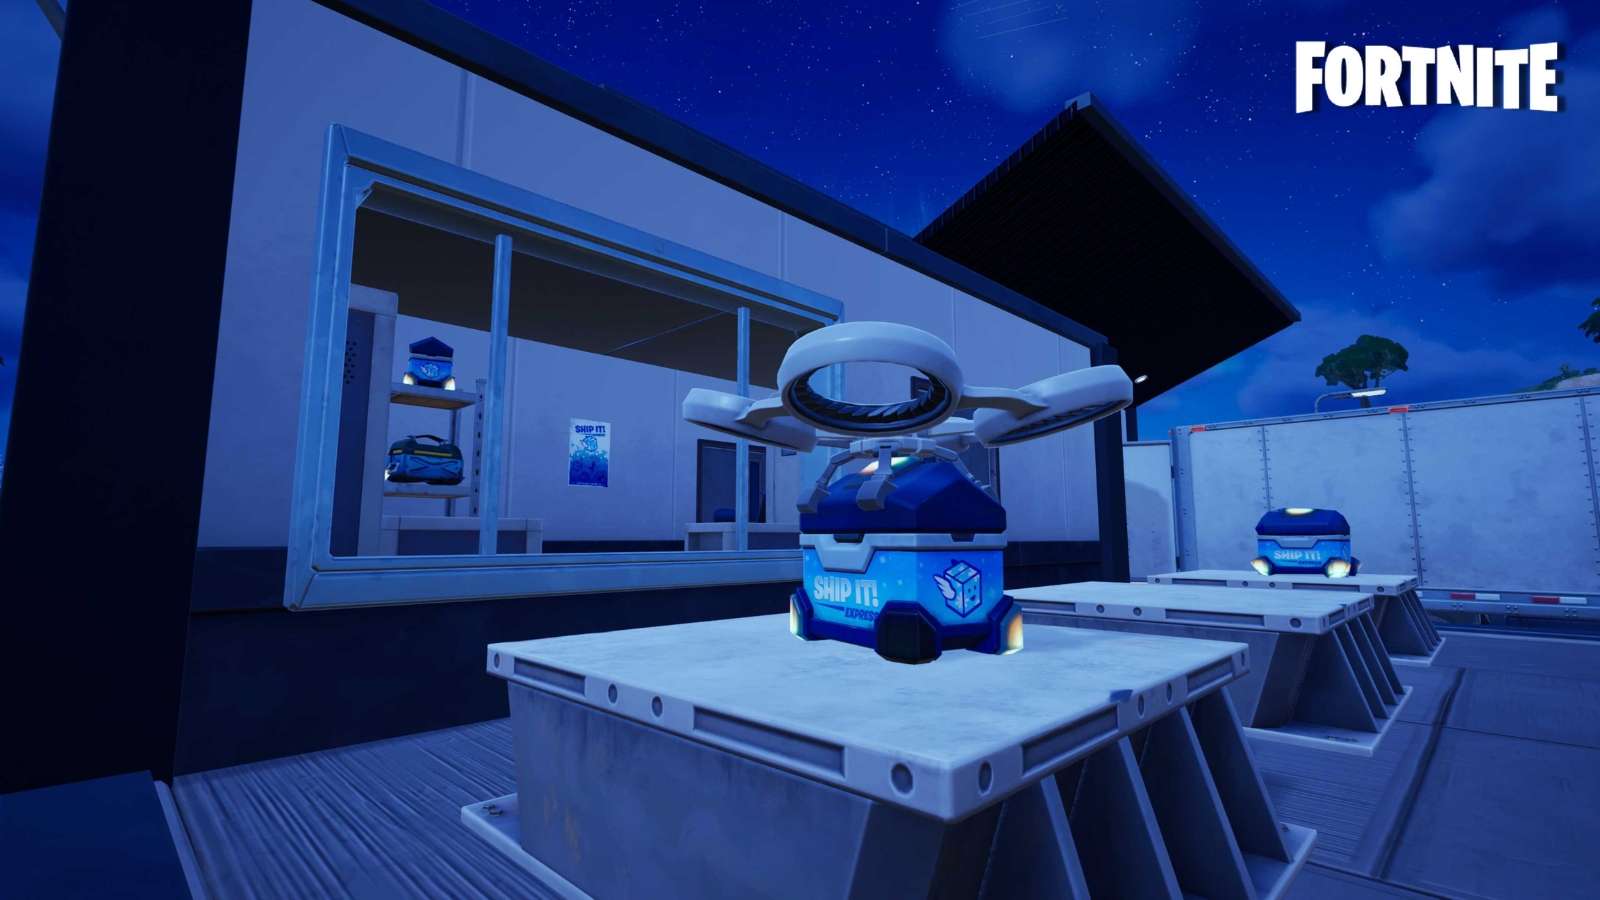 Ship It! Express location in Fortnite